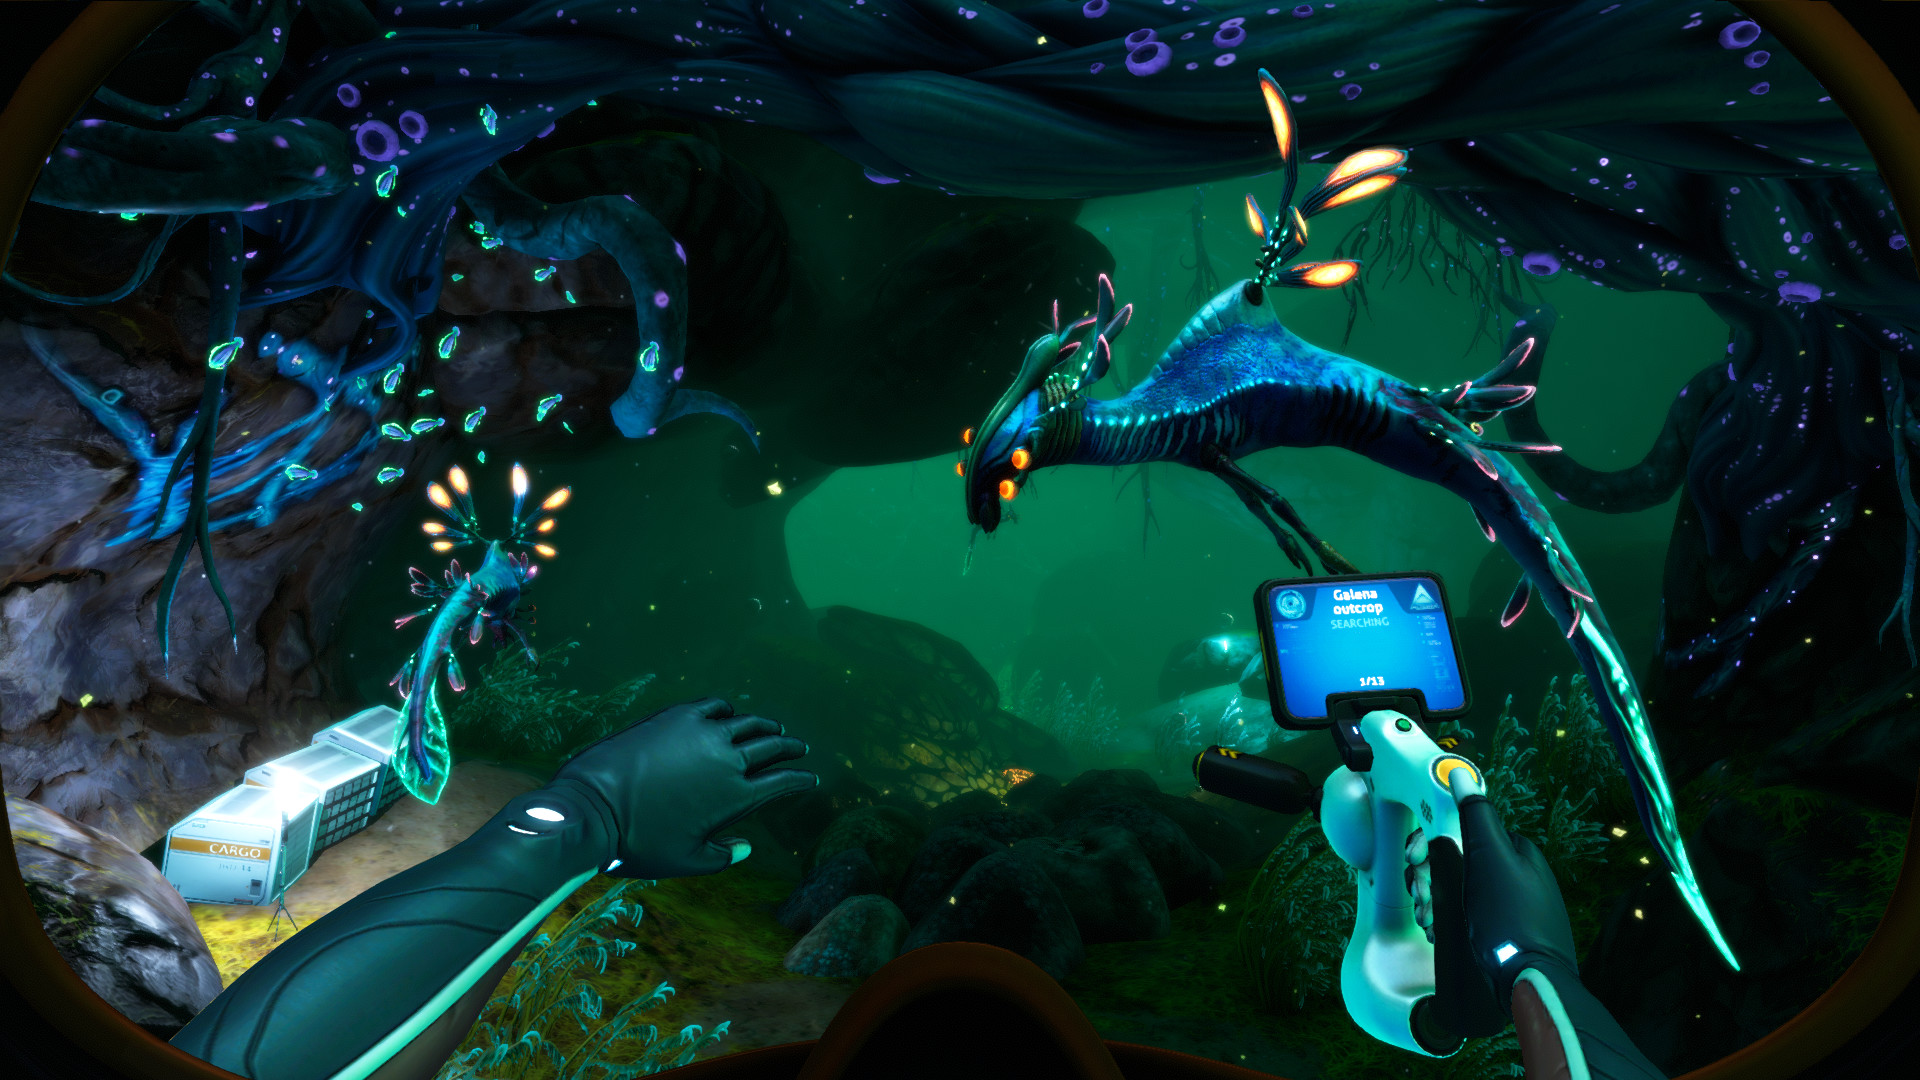 is there going to be another subnautica game